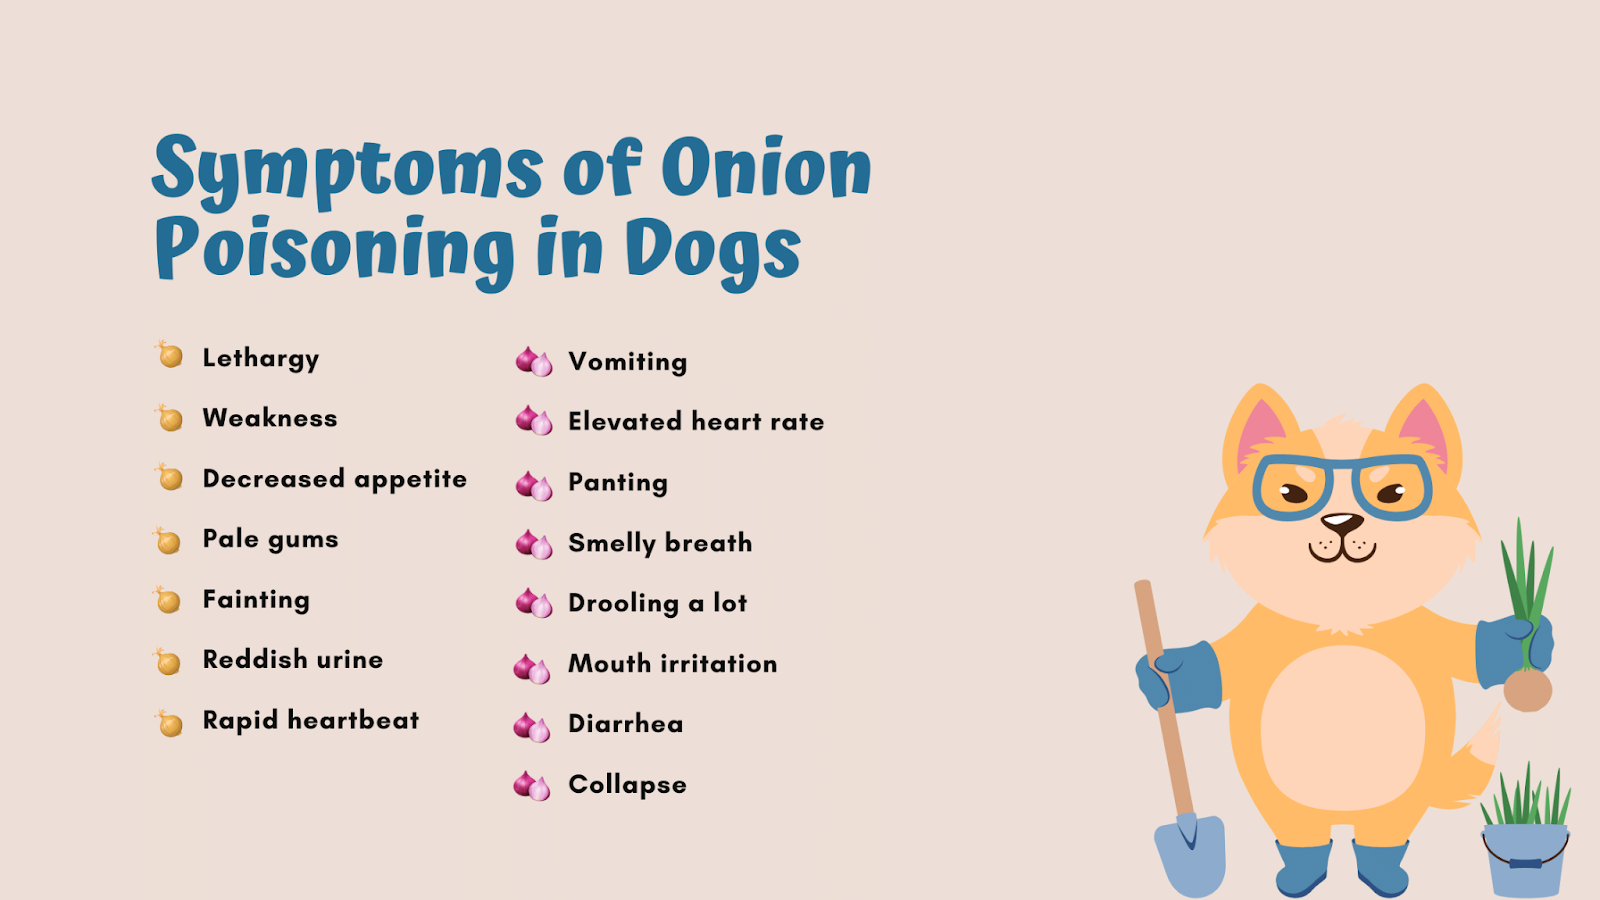 Symptoms onion poisoning in dogs